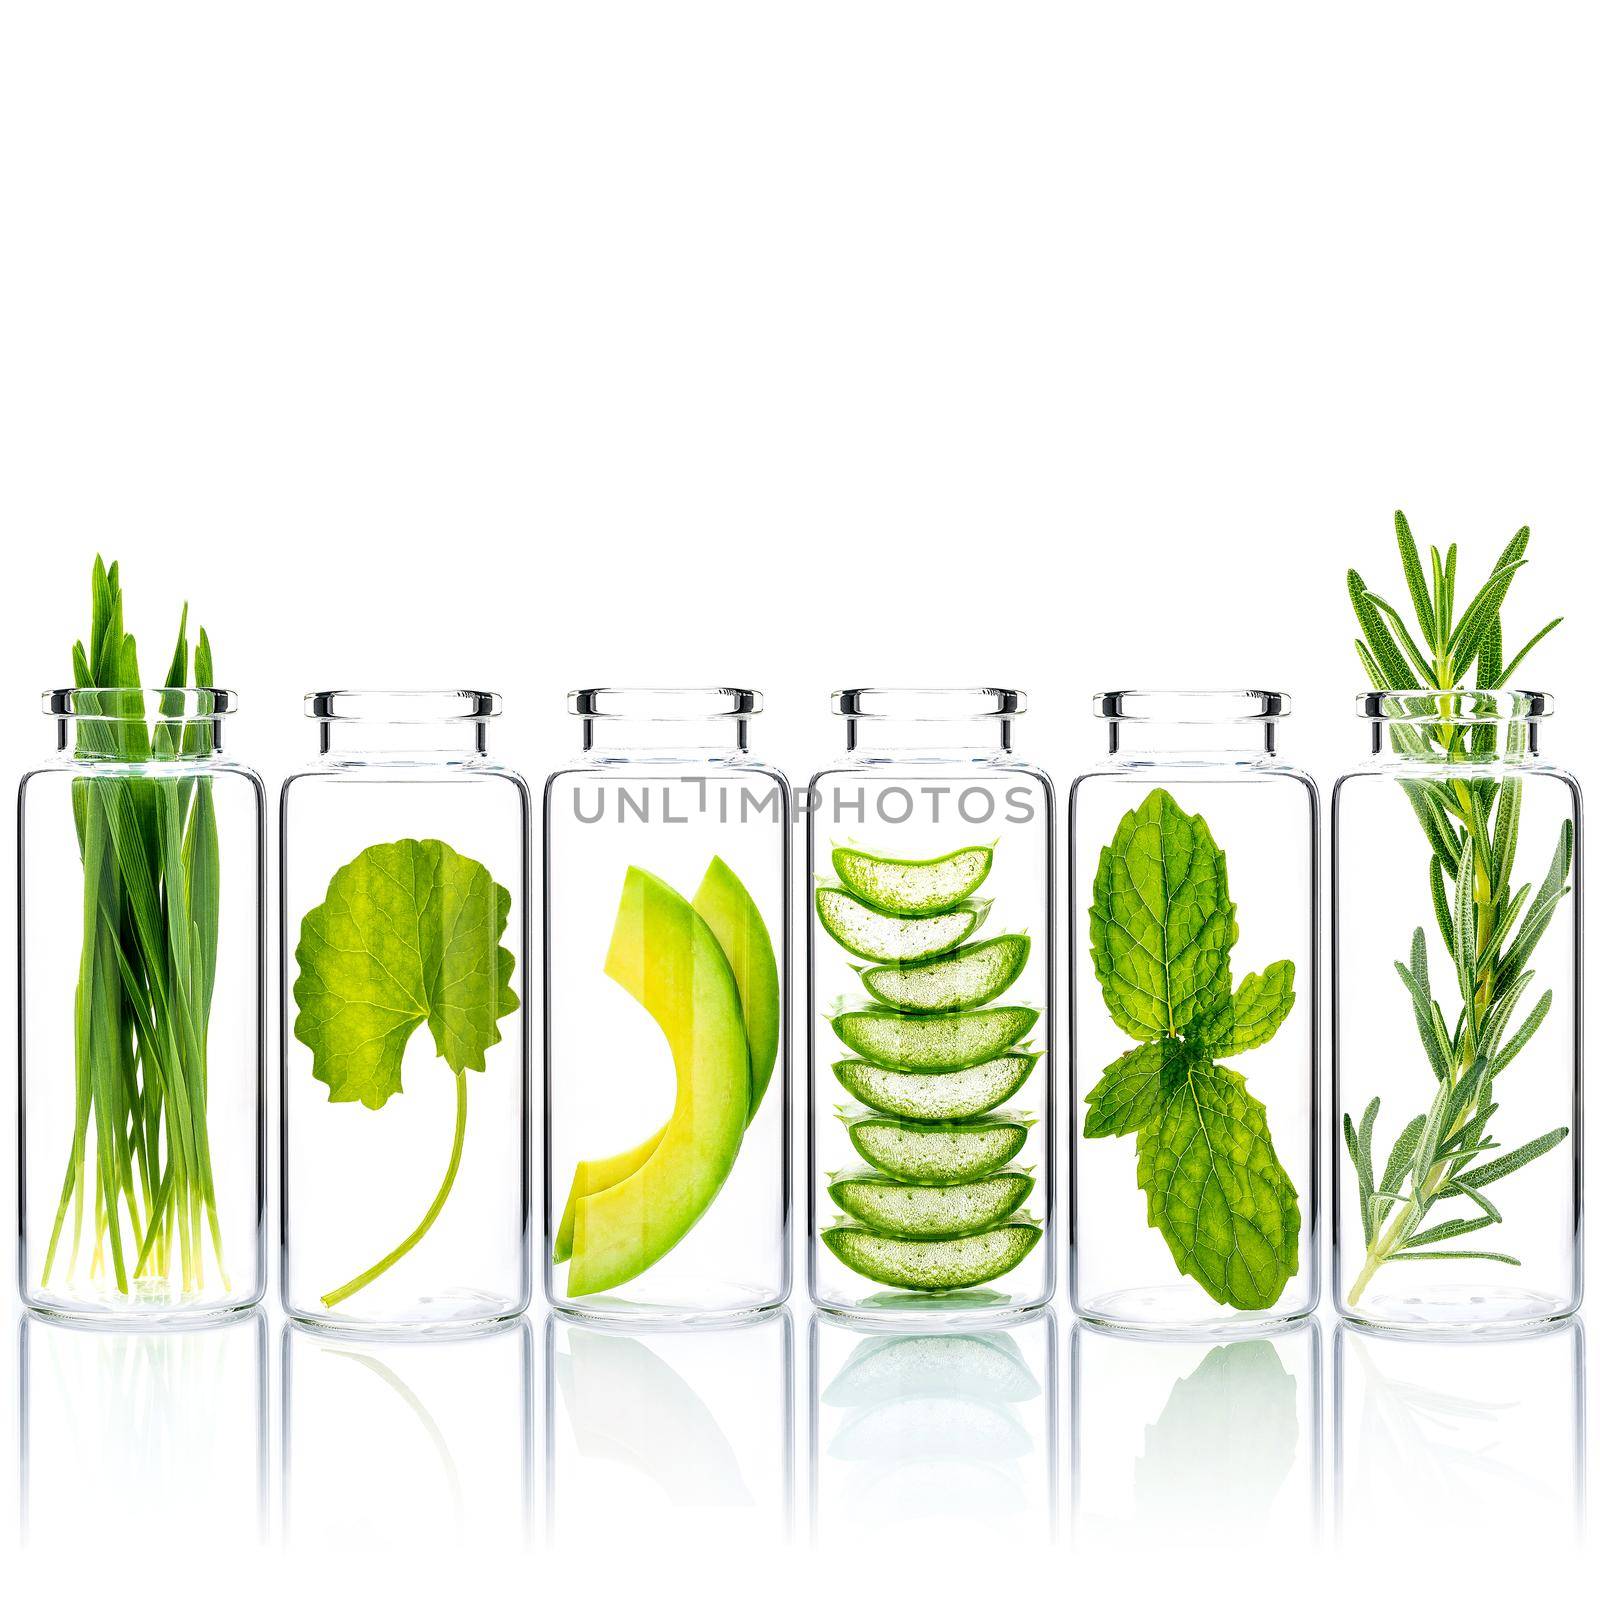 Homemade skin care with natural ingredients wheat grass ,avocado ,aloe vera ,mint leave ,centella asiatica and rosemary in glass bottles isolate on white background.